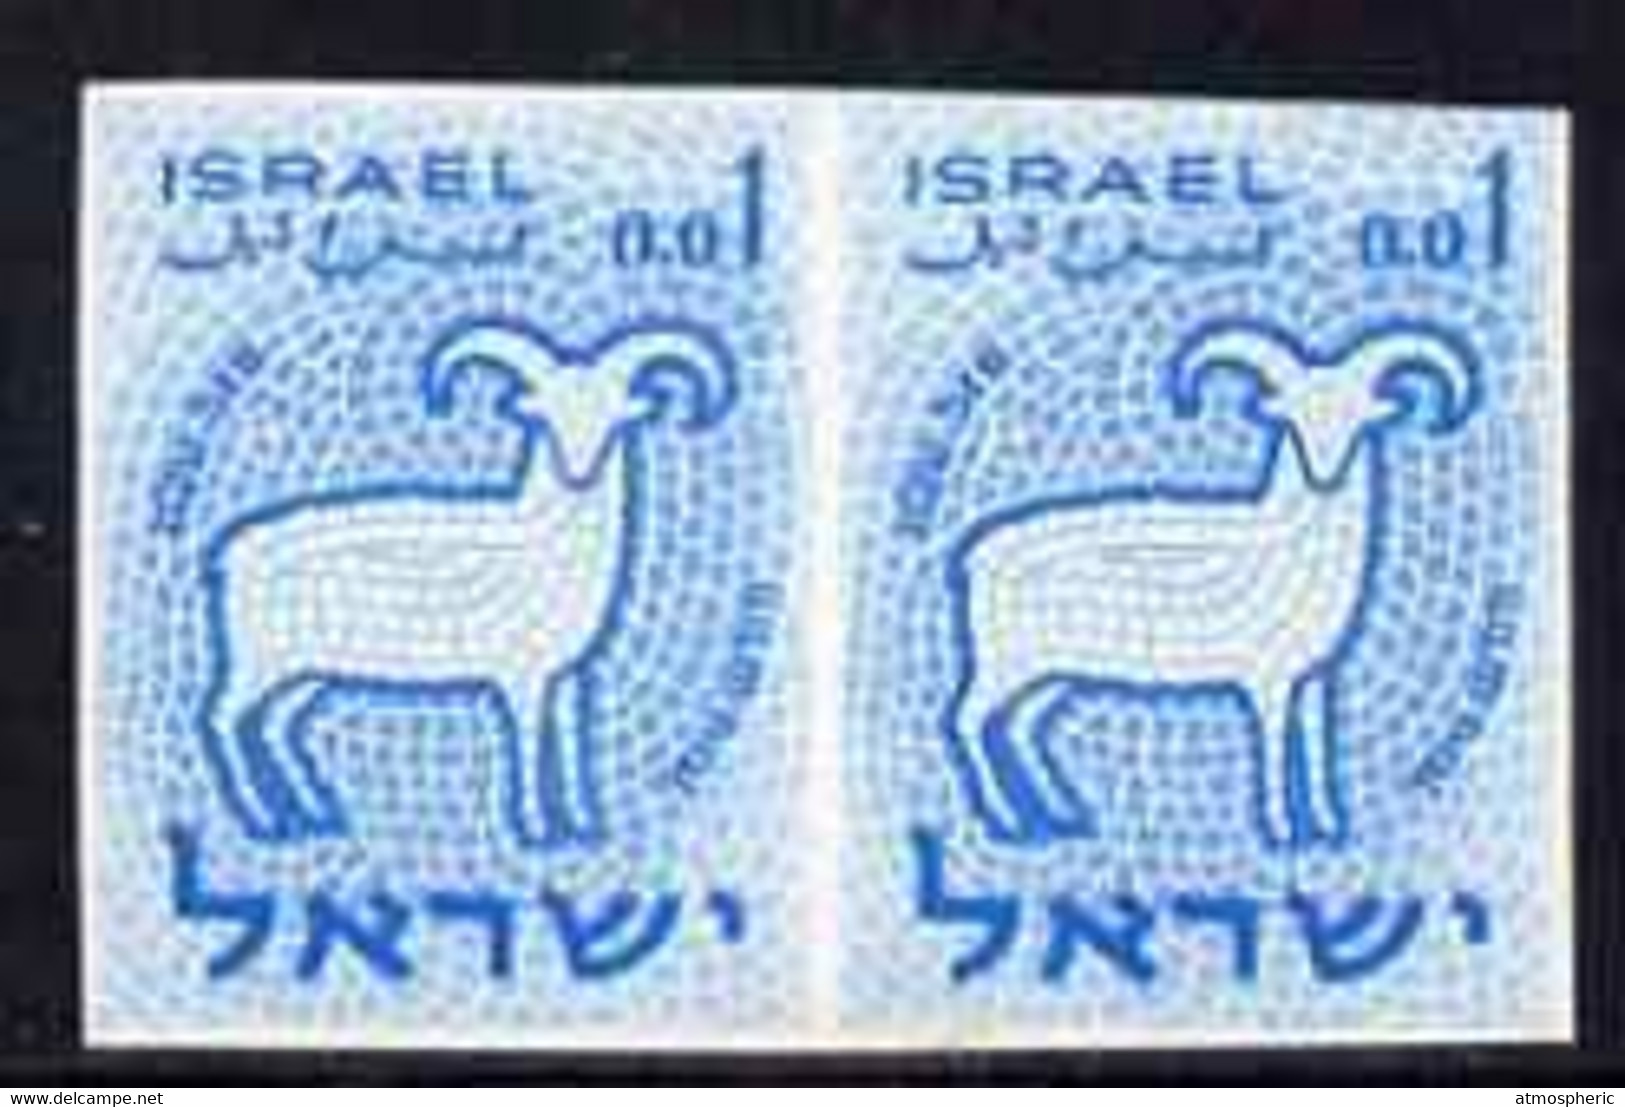 77640 Israel 1961 Zodiac 1a Aries Imperf Pair In Blue (issued Stamp Was Emerald) From The Only Sheet Known U/M - Imperforates, Proofs & Errors